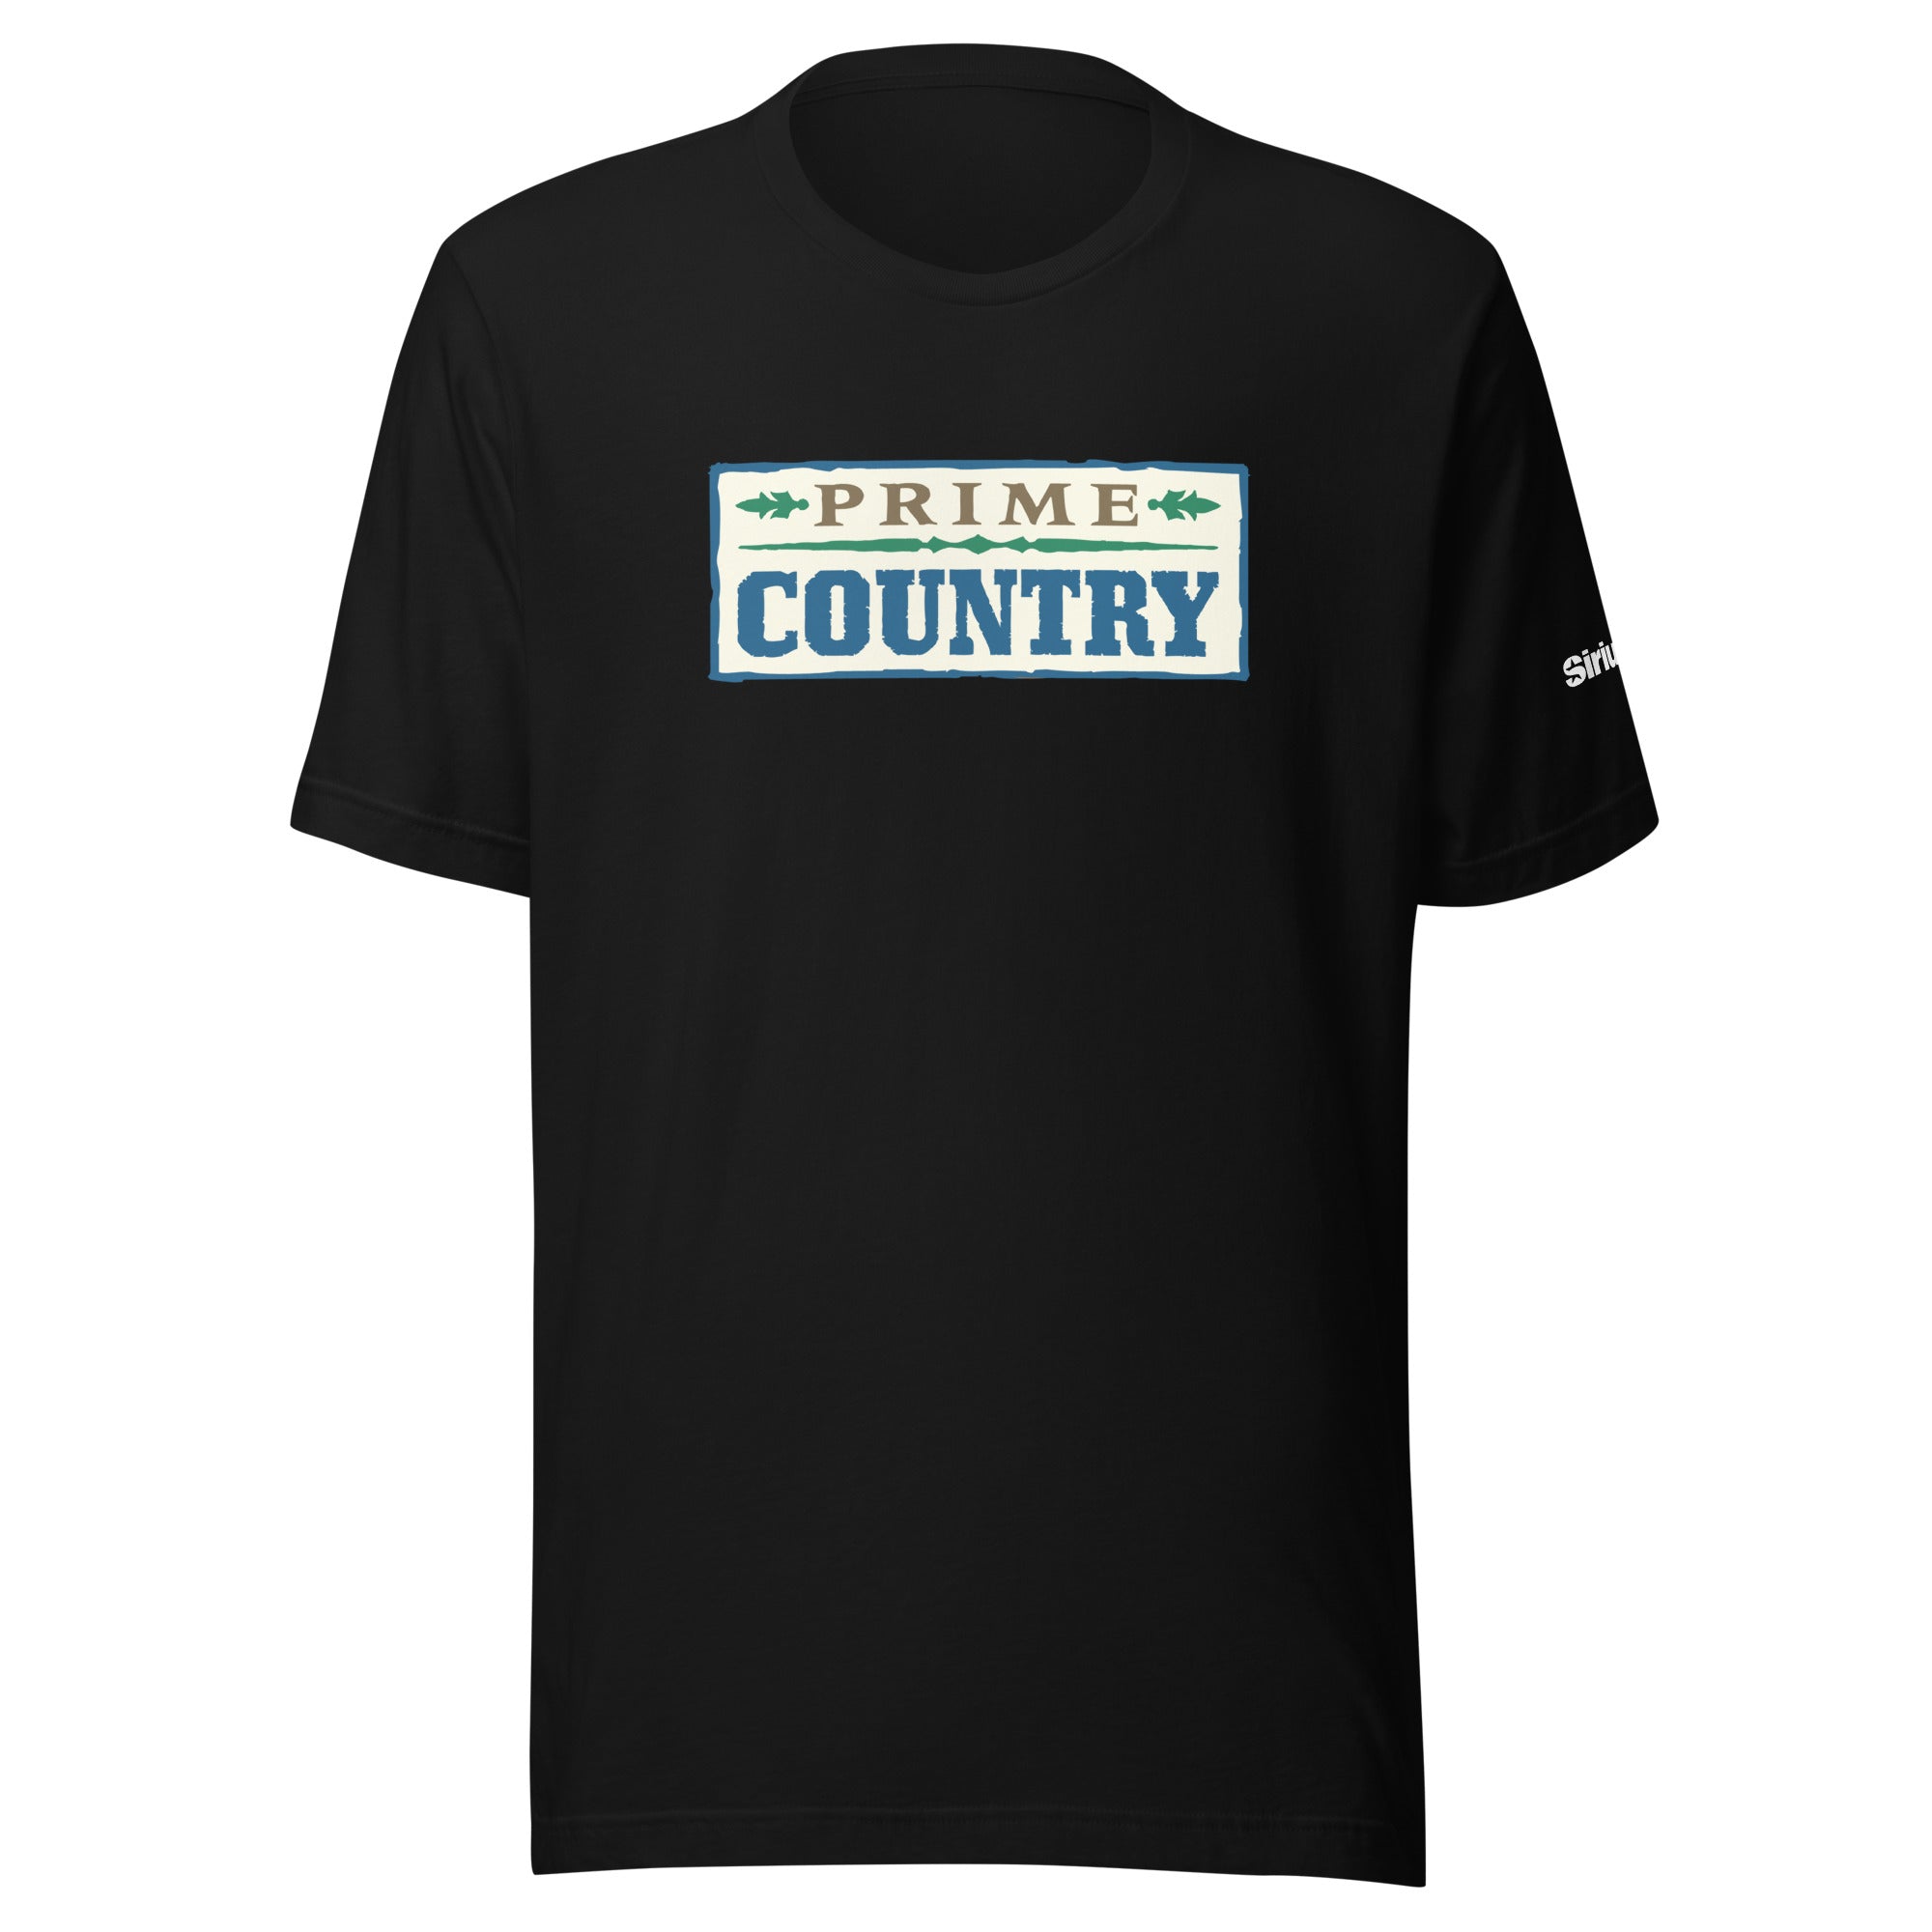 Prime Country: T-shirt (Black)